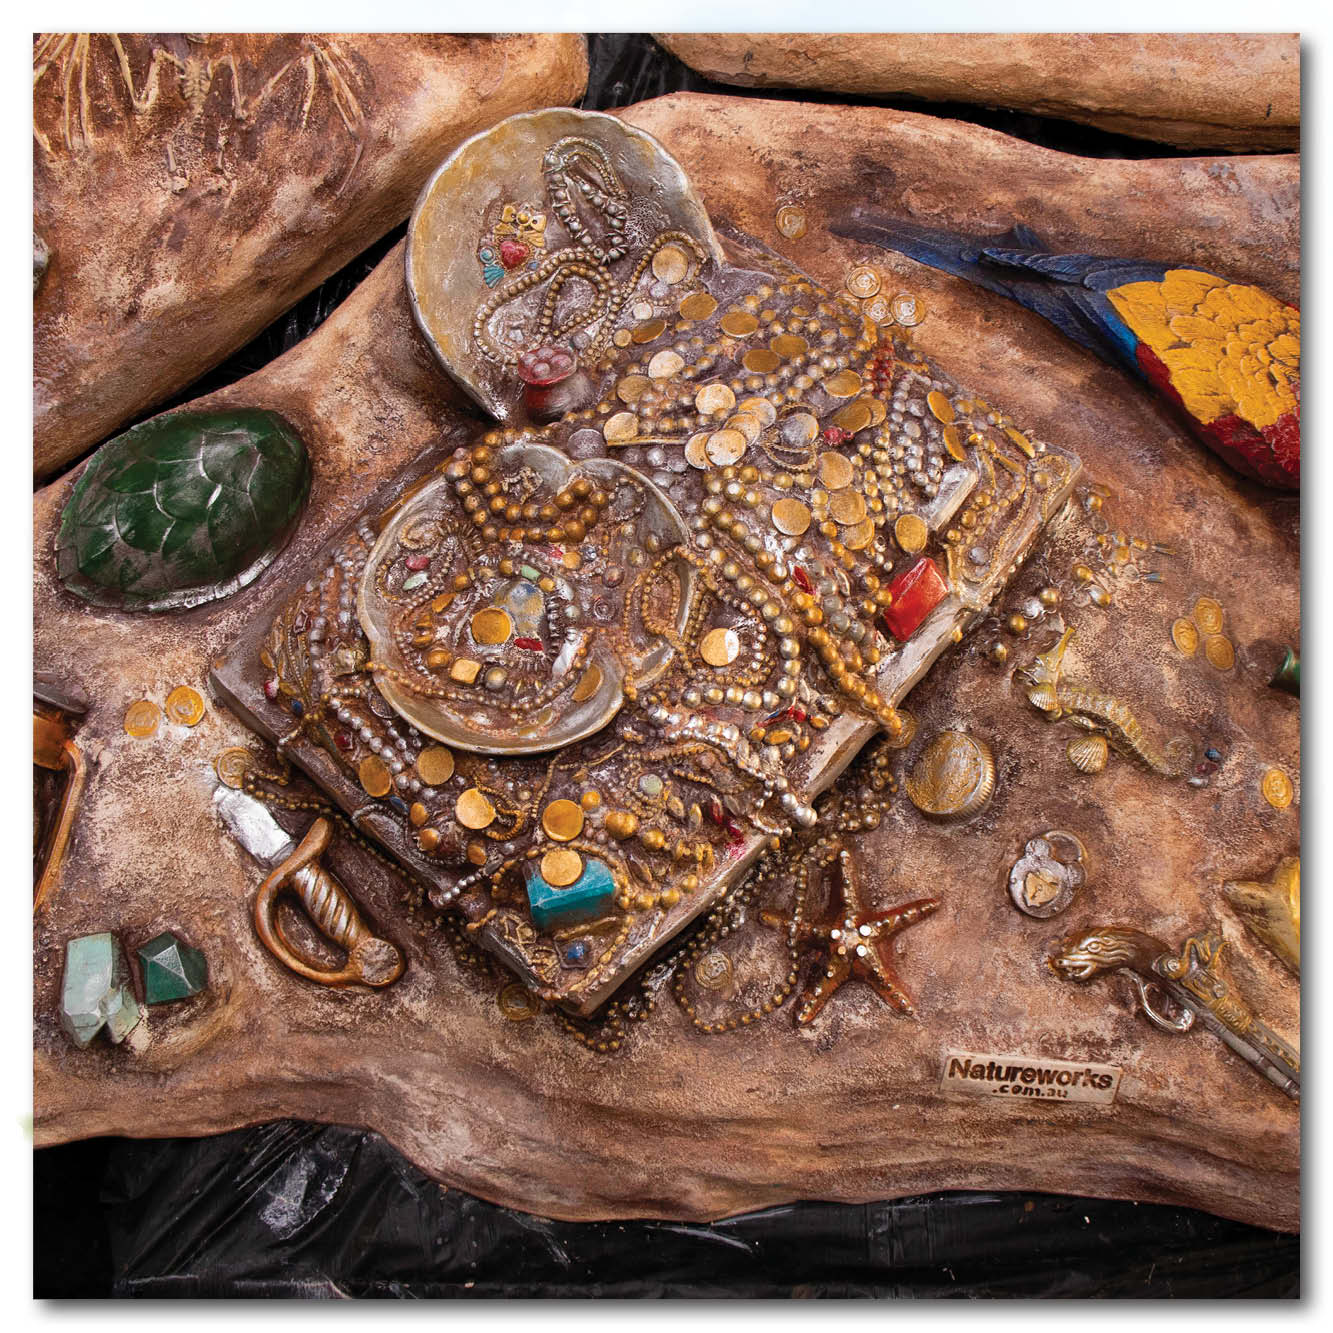 pirate-treasure-dig-x-marks-the-spot-sculptures-natureworks